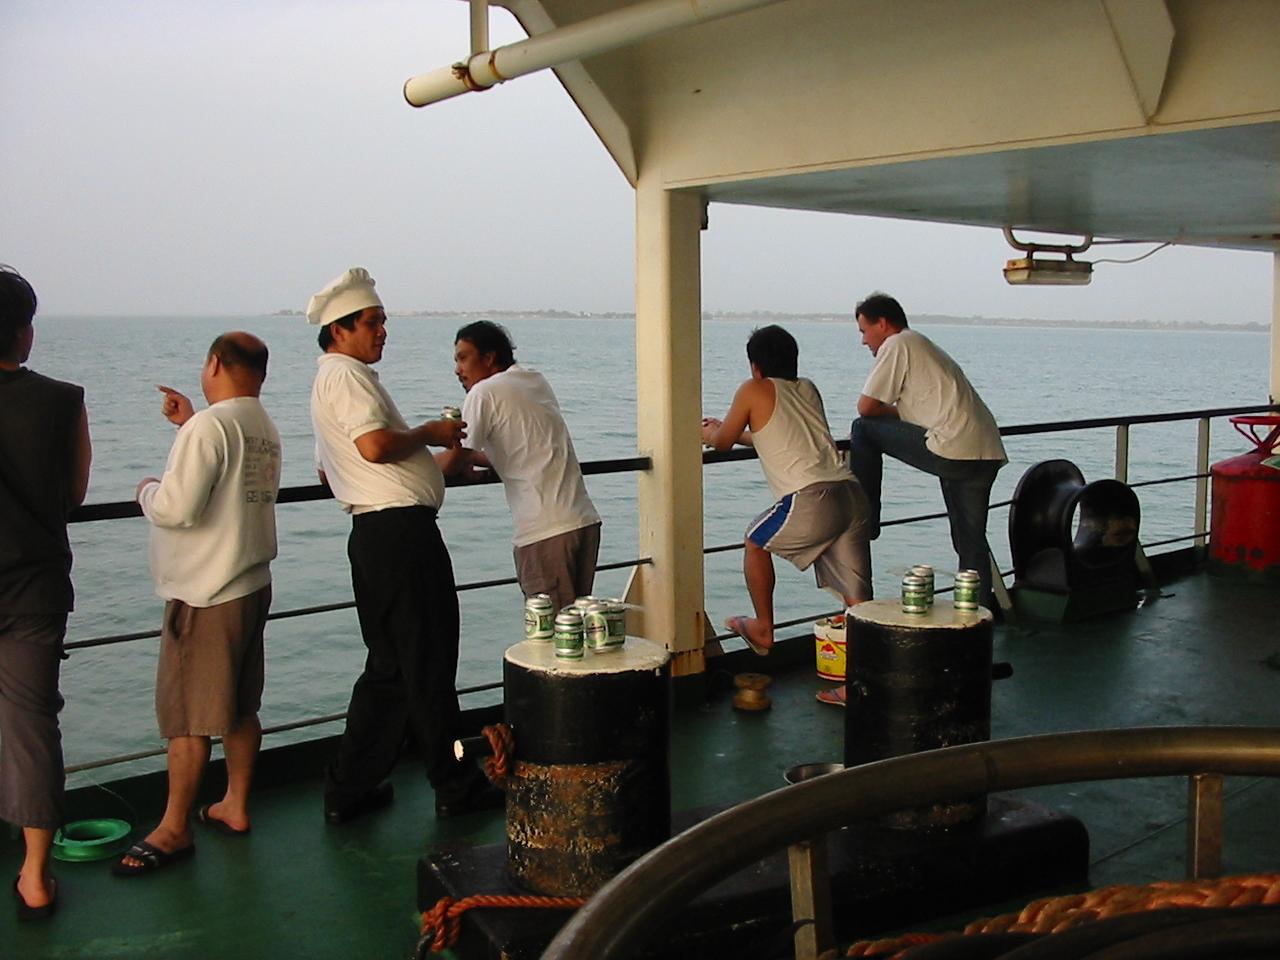 Seafarers looking out at sea